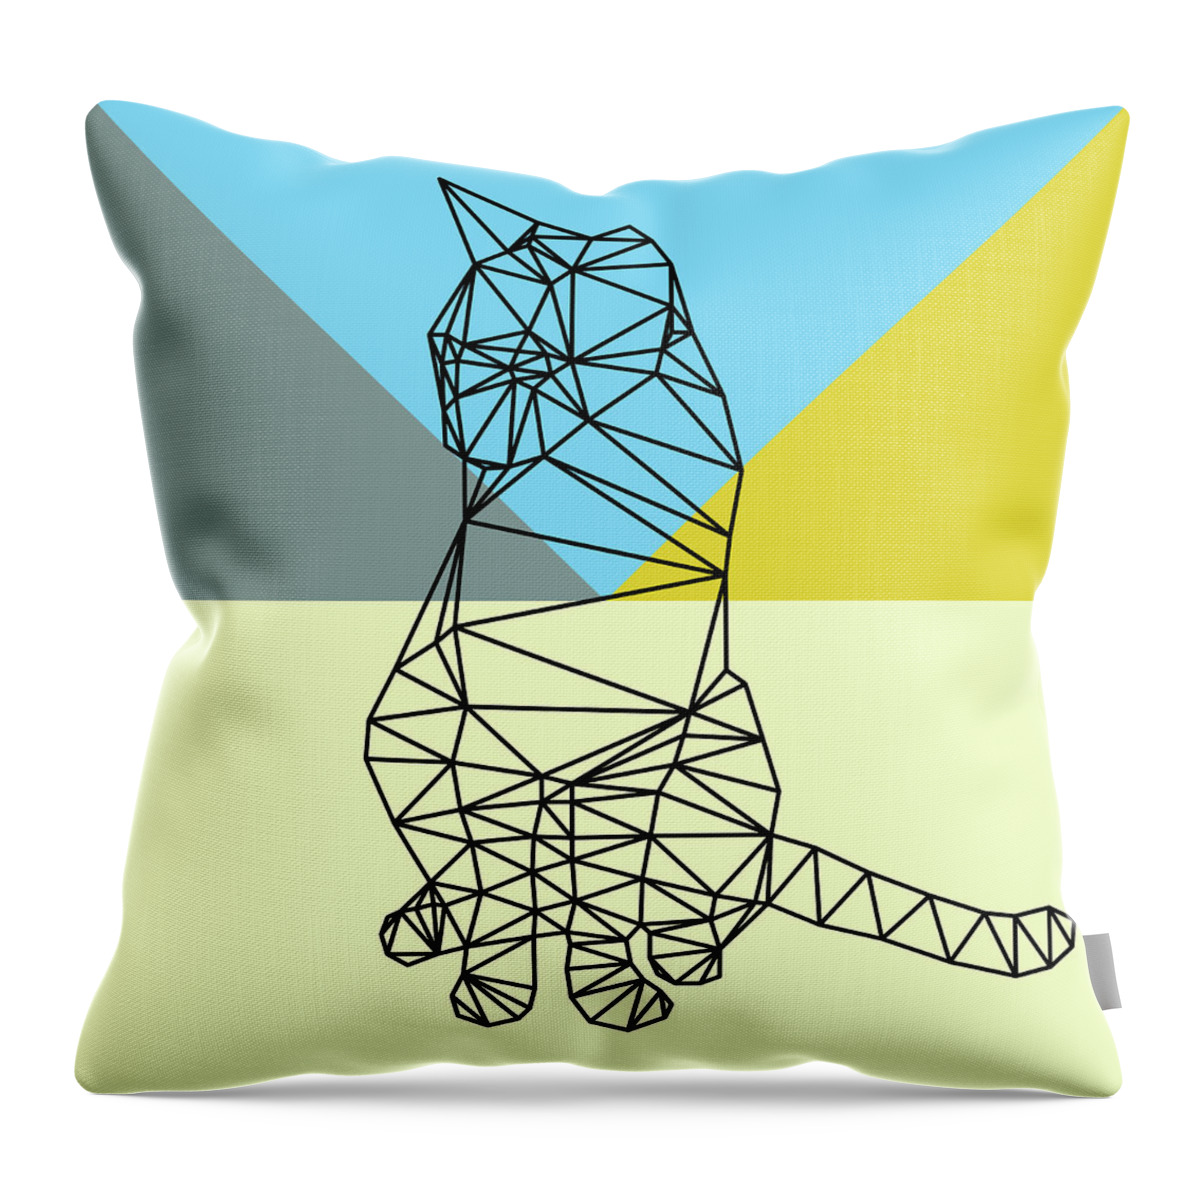 Cat Throw Pillow featuring the digital art Party Cat #2 by Naxart Studio